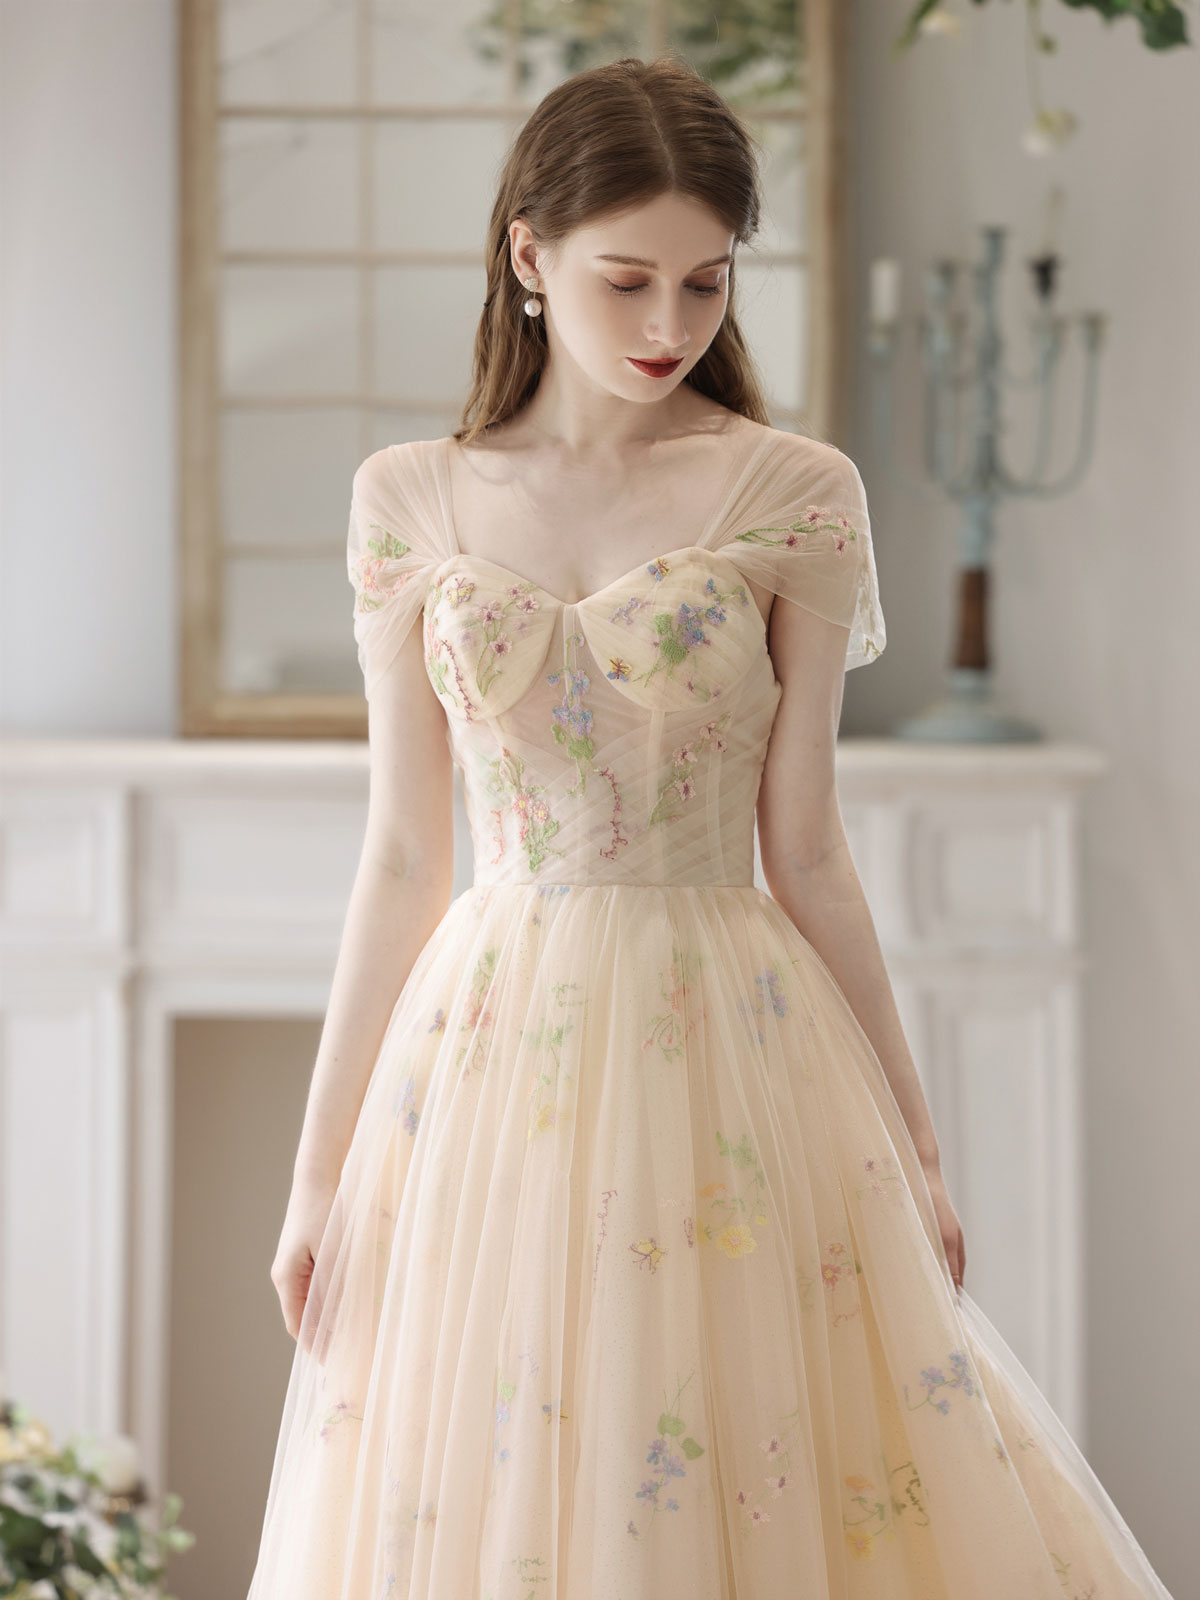 Fairytale Boho Champagne Tulle Sheer Illusion Prom Dress - DollyGown